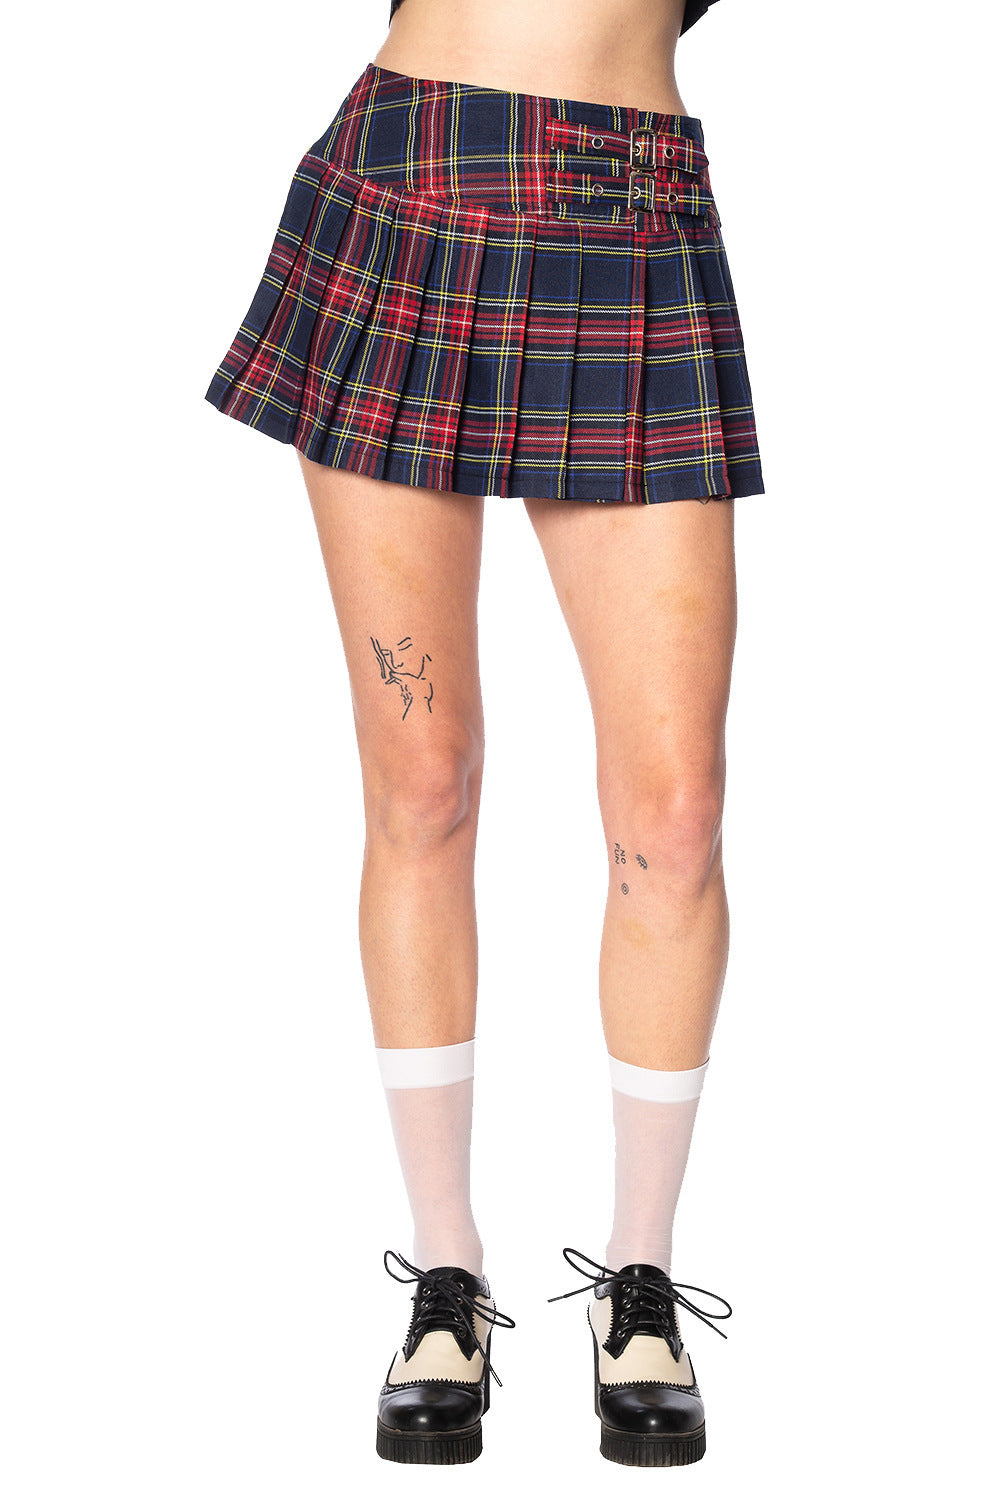 Navy and red tartan mini skirt with buckle features. 